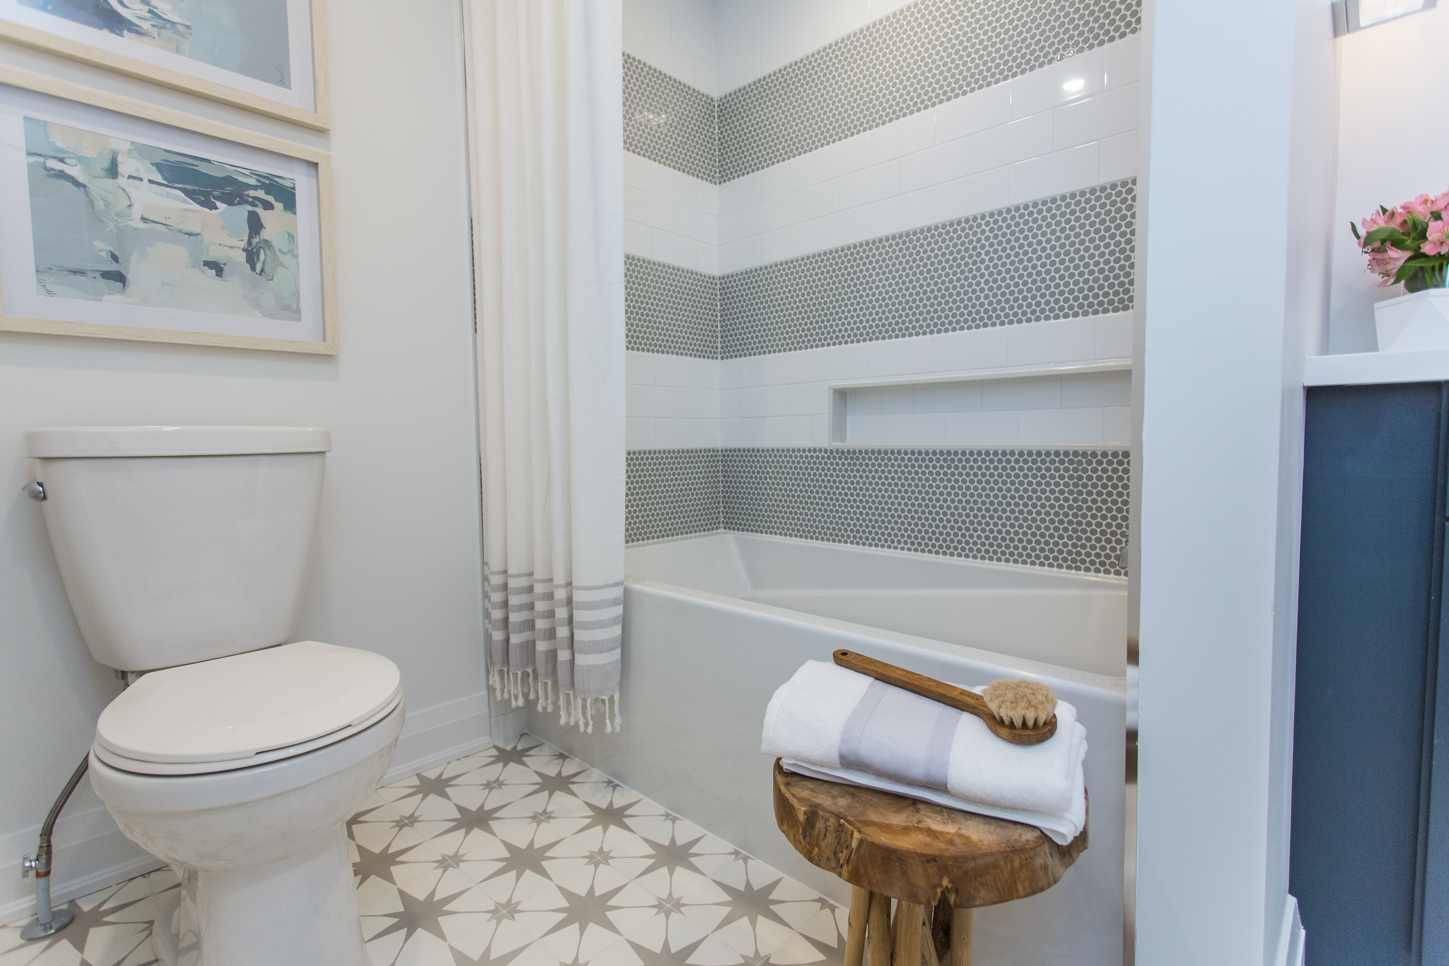 Bathroom with patterned floors and grey/white striped shower